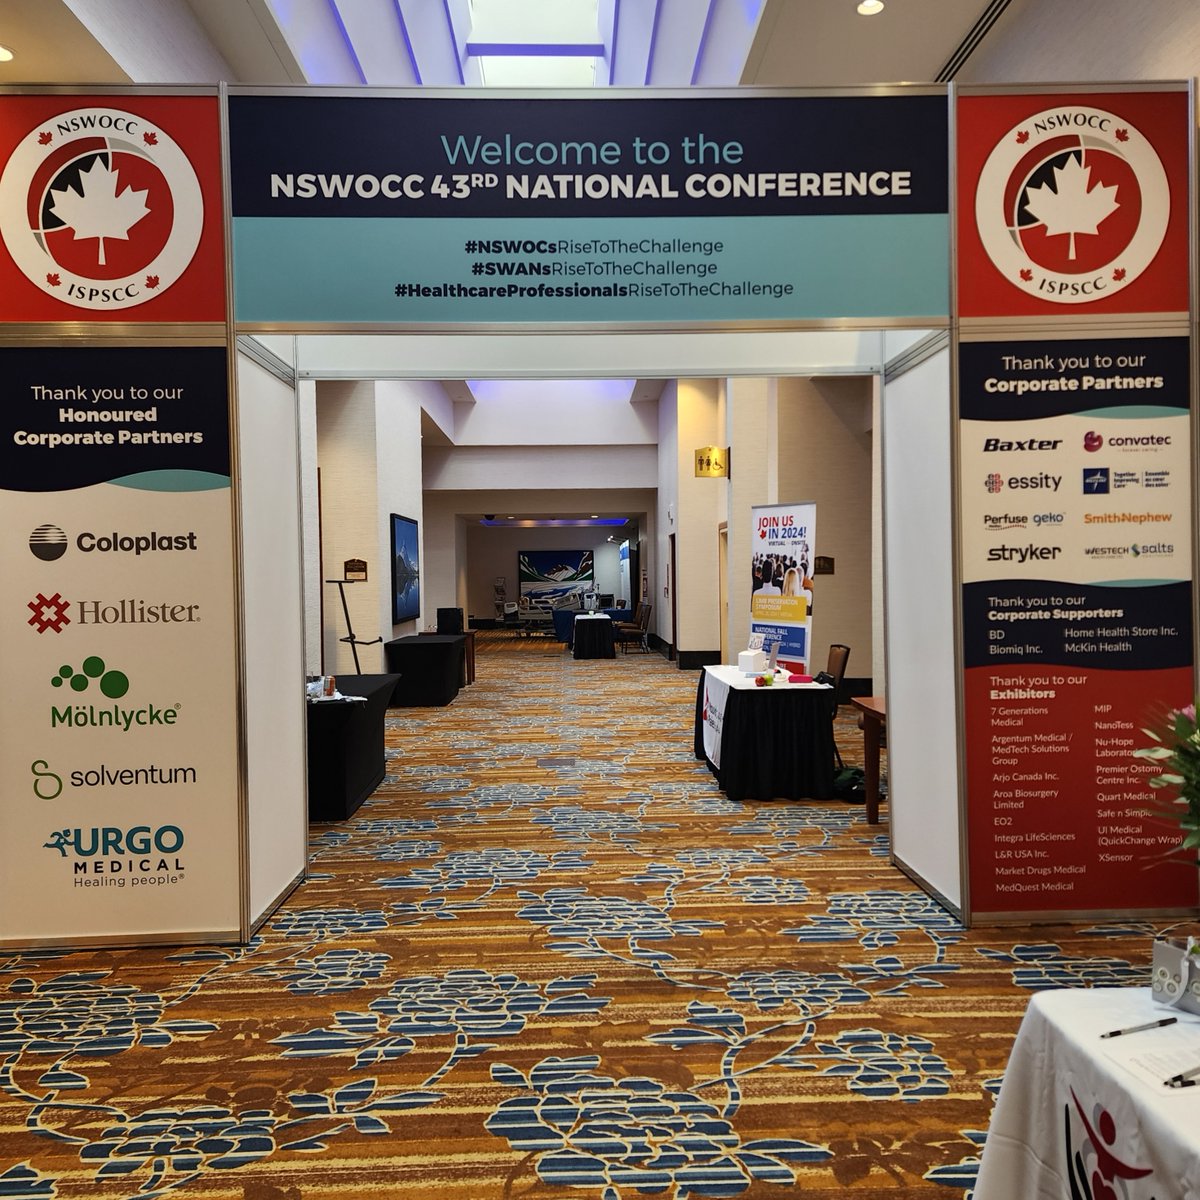 Congratulations again to @NSWOC (Nurses Specialized in Wound, Ostomy and Continence Canada) for hosting an incredible conference #NSWOCCinYYC! 

A wonderful opportunity to connect with the #woundcare community from coast to coast to coast and thank you for having us!